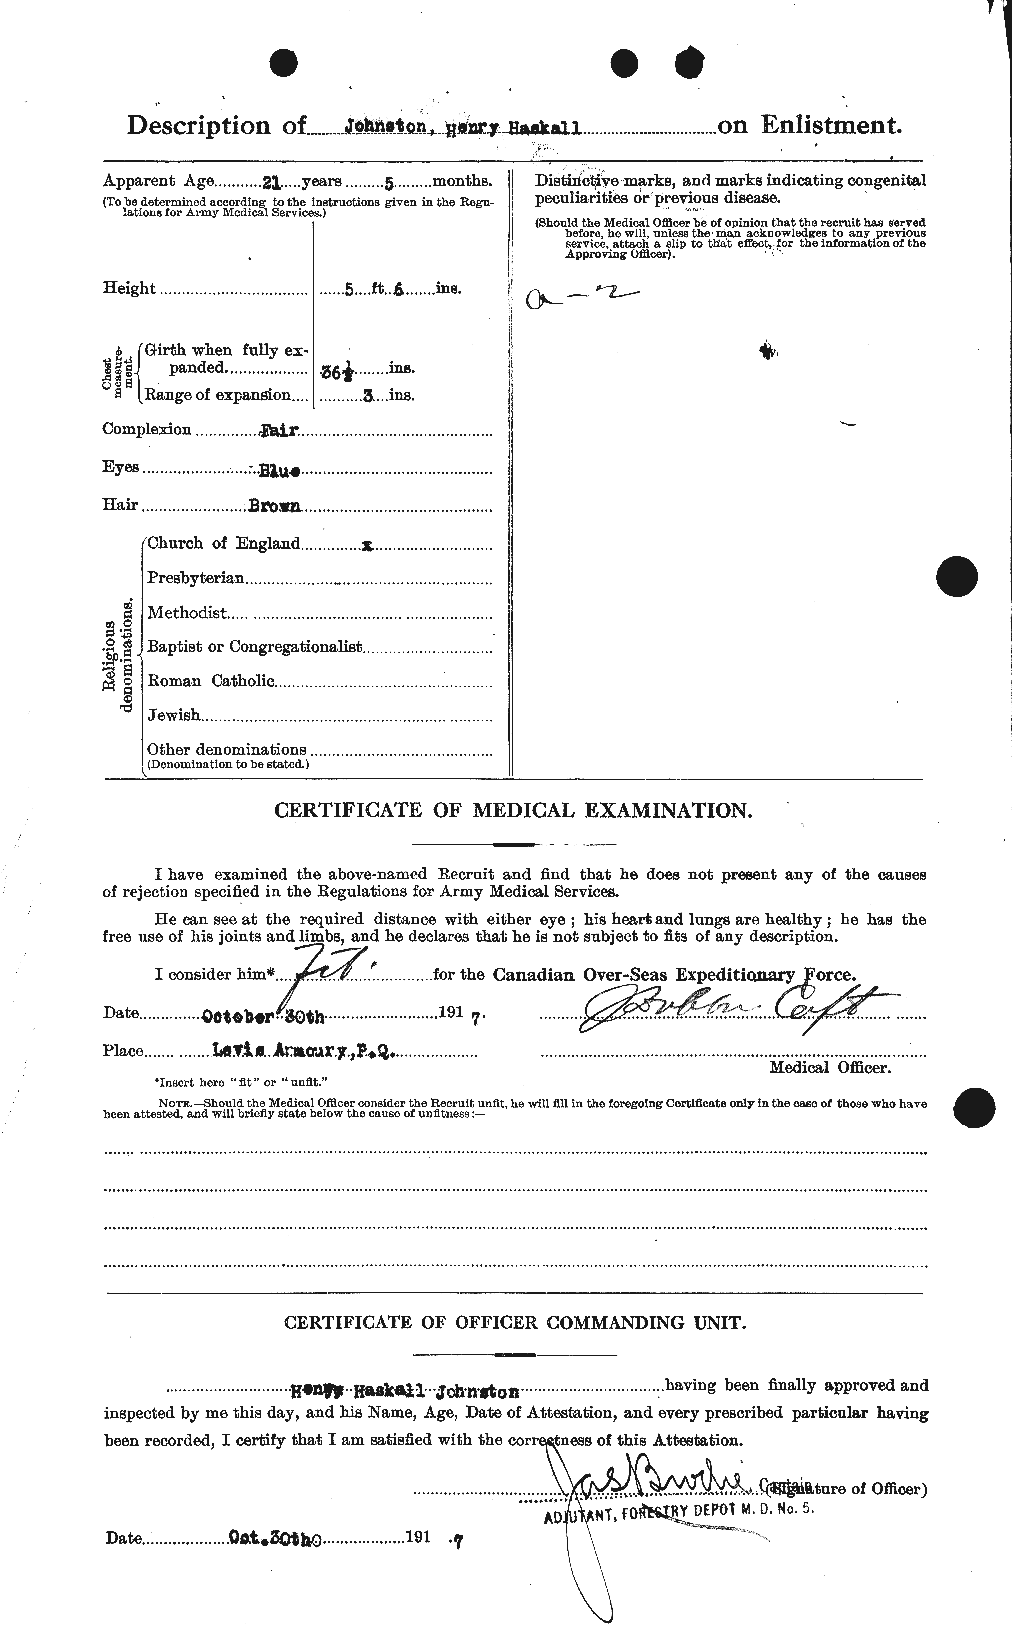 Personnel Records of the First World War - CEF 419543b